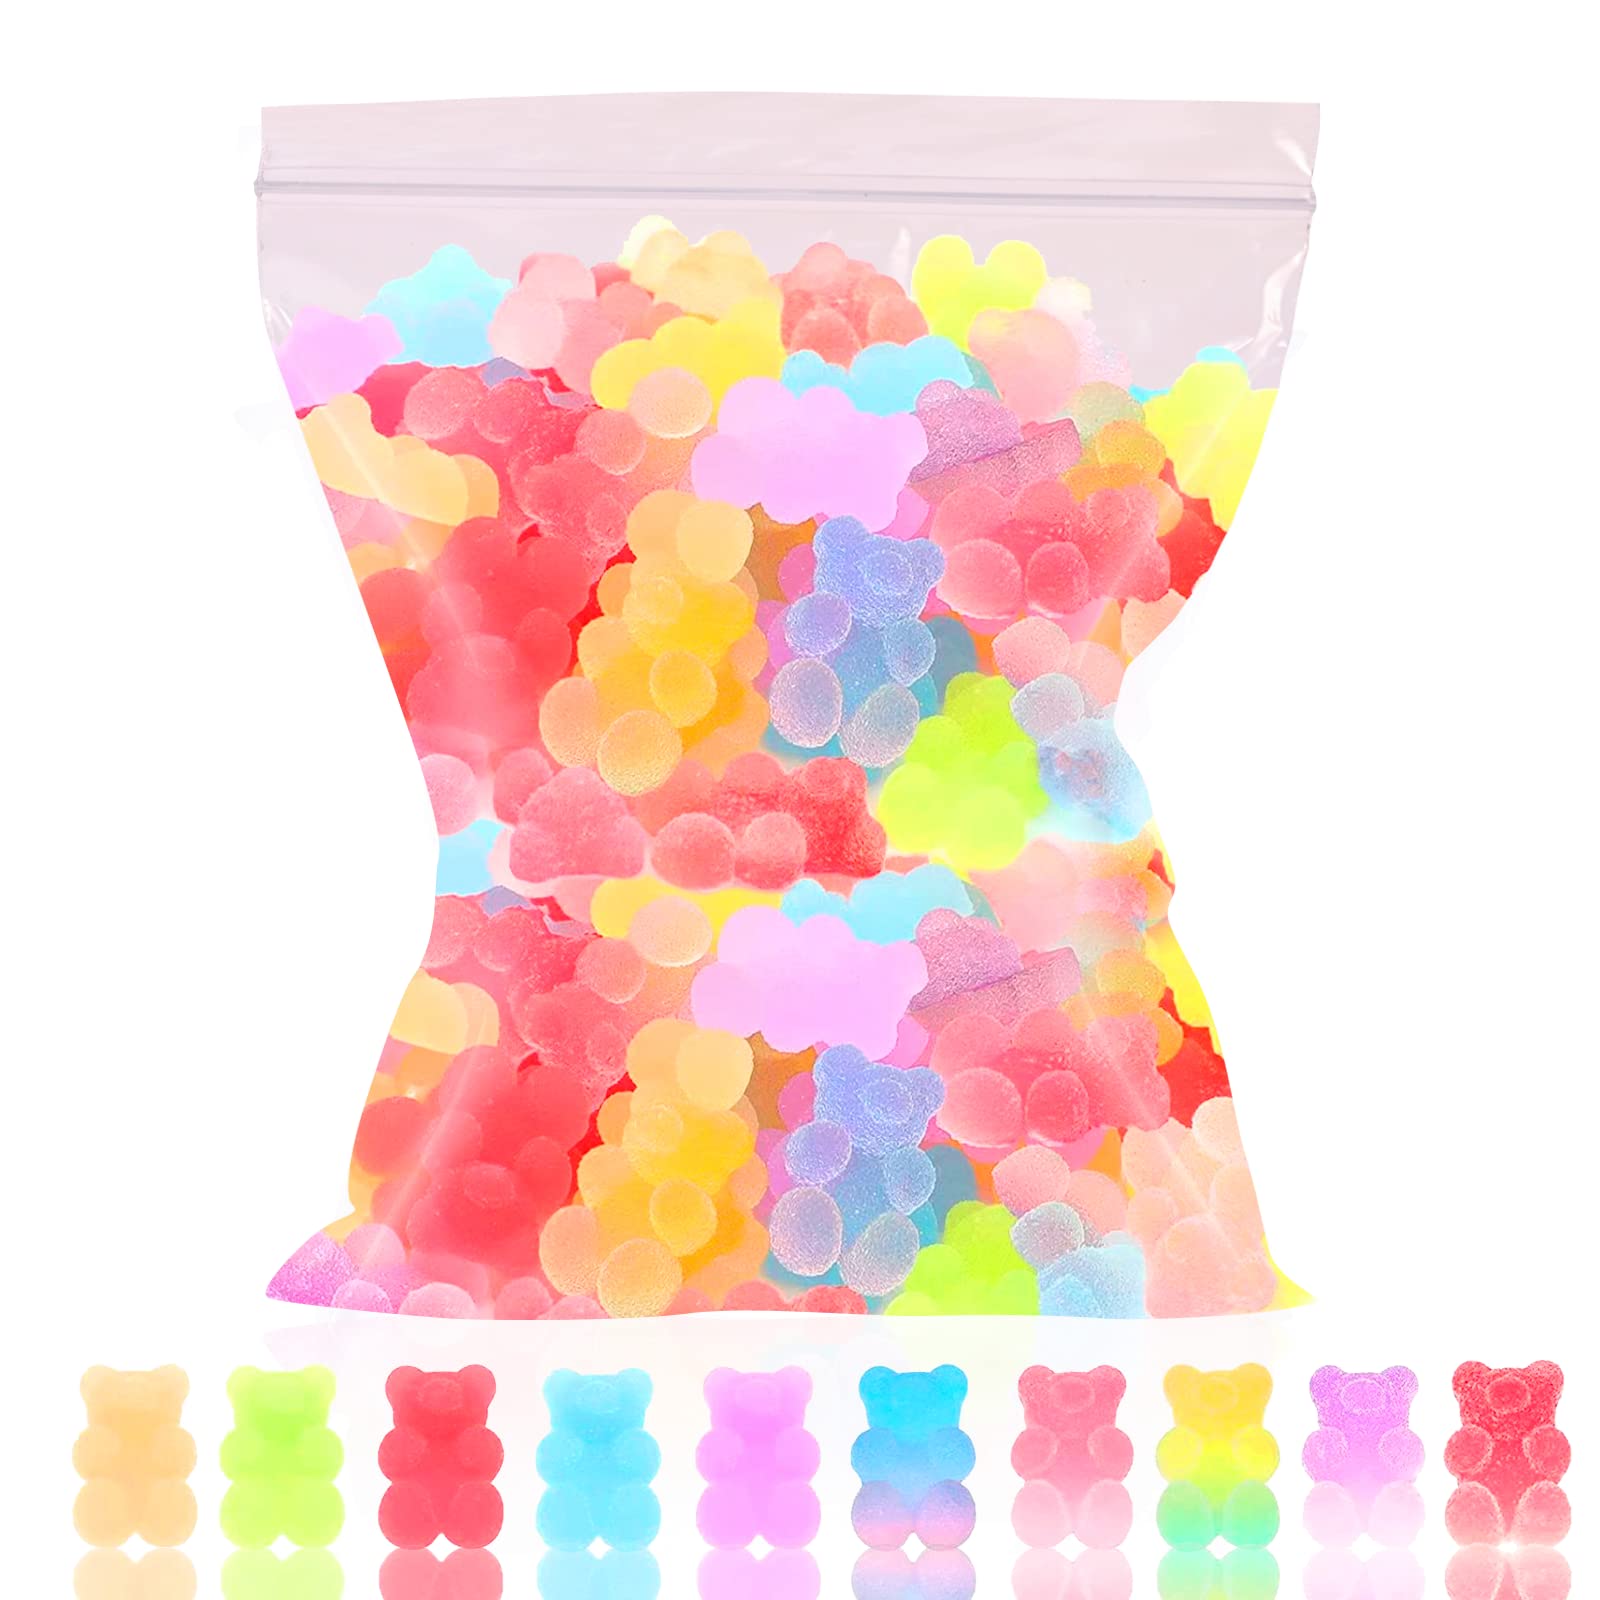 20pc 20mm 3D Gummy Bear Flatback Resin Candy Charms Colorful